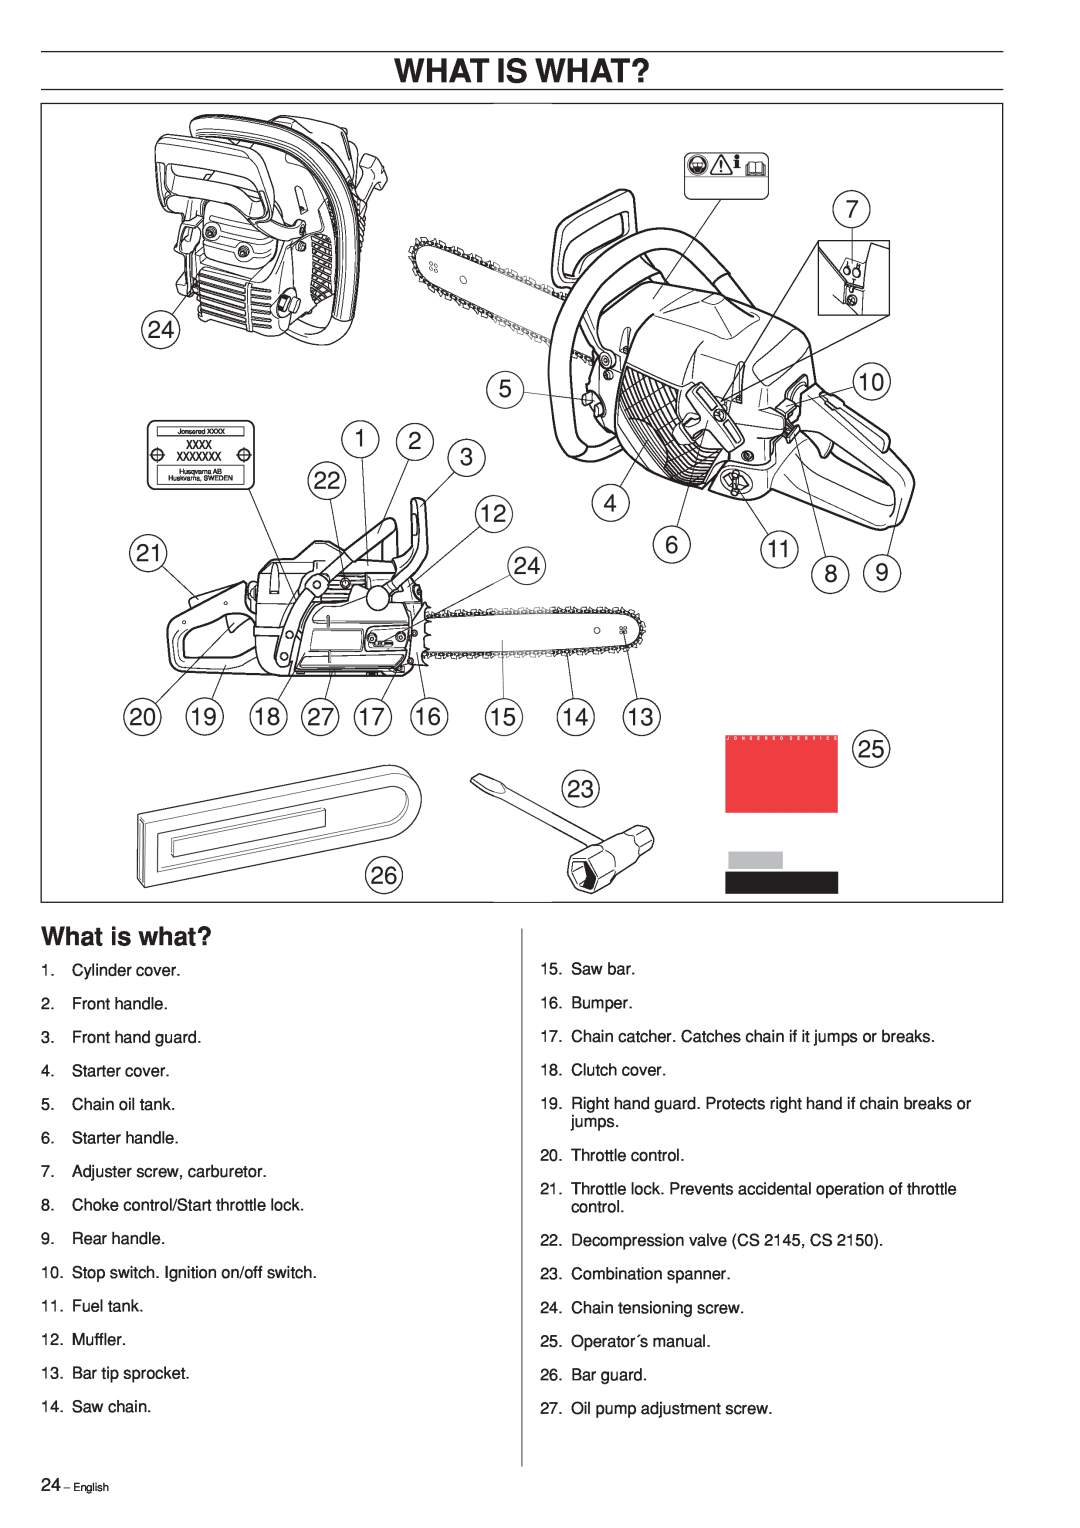 Jonsered CS 2141, CS 2150, CS 2145 manual What Is What?, What is what? 